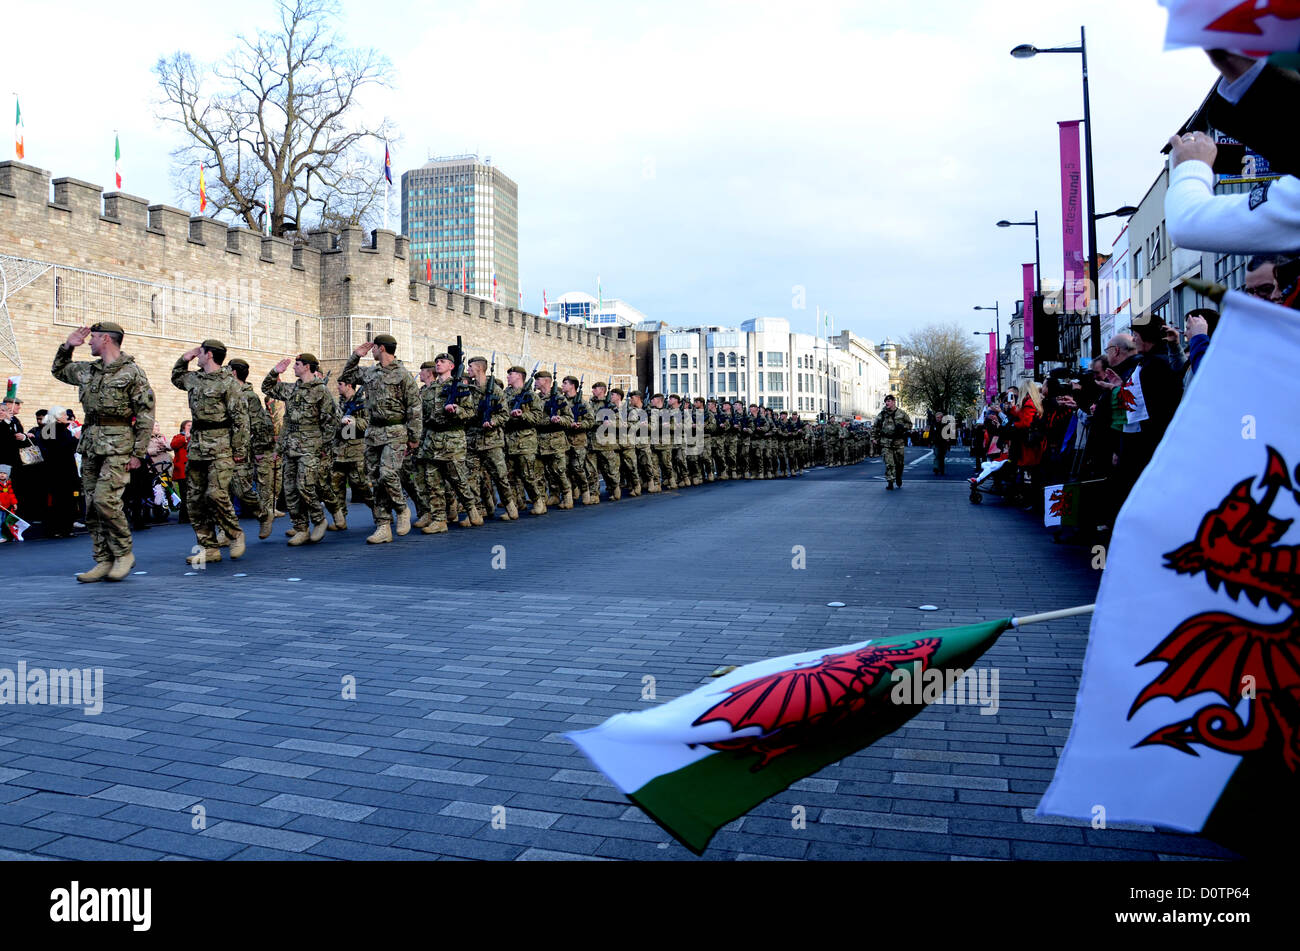 Cardiff, Wales, UK. 30th November 2012. 1st Battalion Welsh Guards have paid tribute to four soldiers who died whilst on tour with them in Afghanistan, as soldiers from the battalion march through the streets of Cardiff. More than three hundred soldiers from 1st Battalion Welsh Guards have marched through Cardiff this afternoon after a six-month tour of Afghanistan. The day started with a service of rememberance for the four members of the battalion who died during the operation. The total number of Welsh personnel killed has now risen to 32. Credit:  andrew chittock / Alamy Live News   Stock Photo